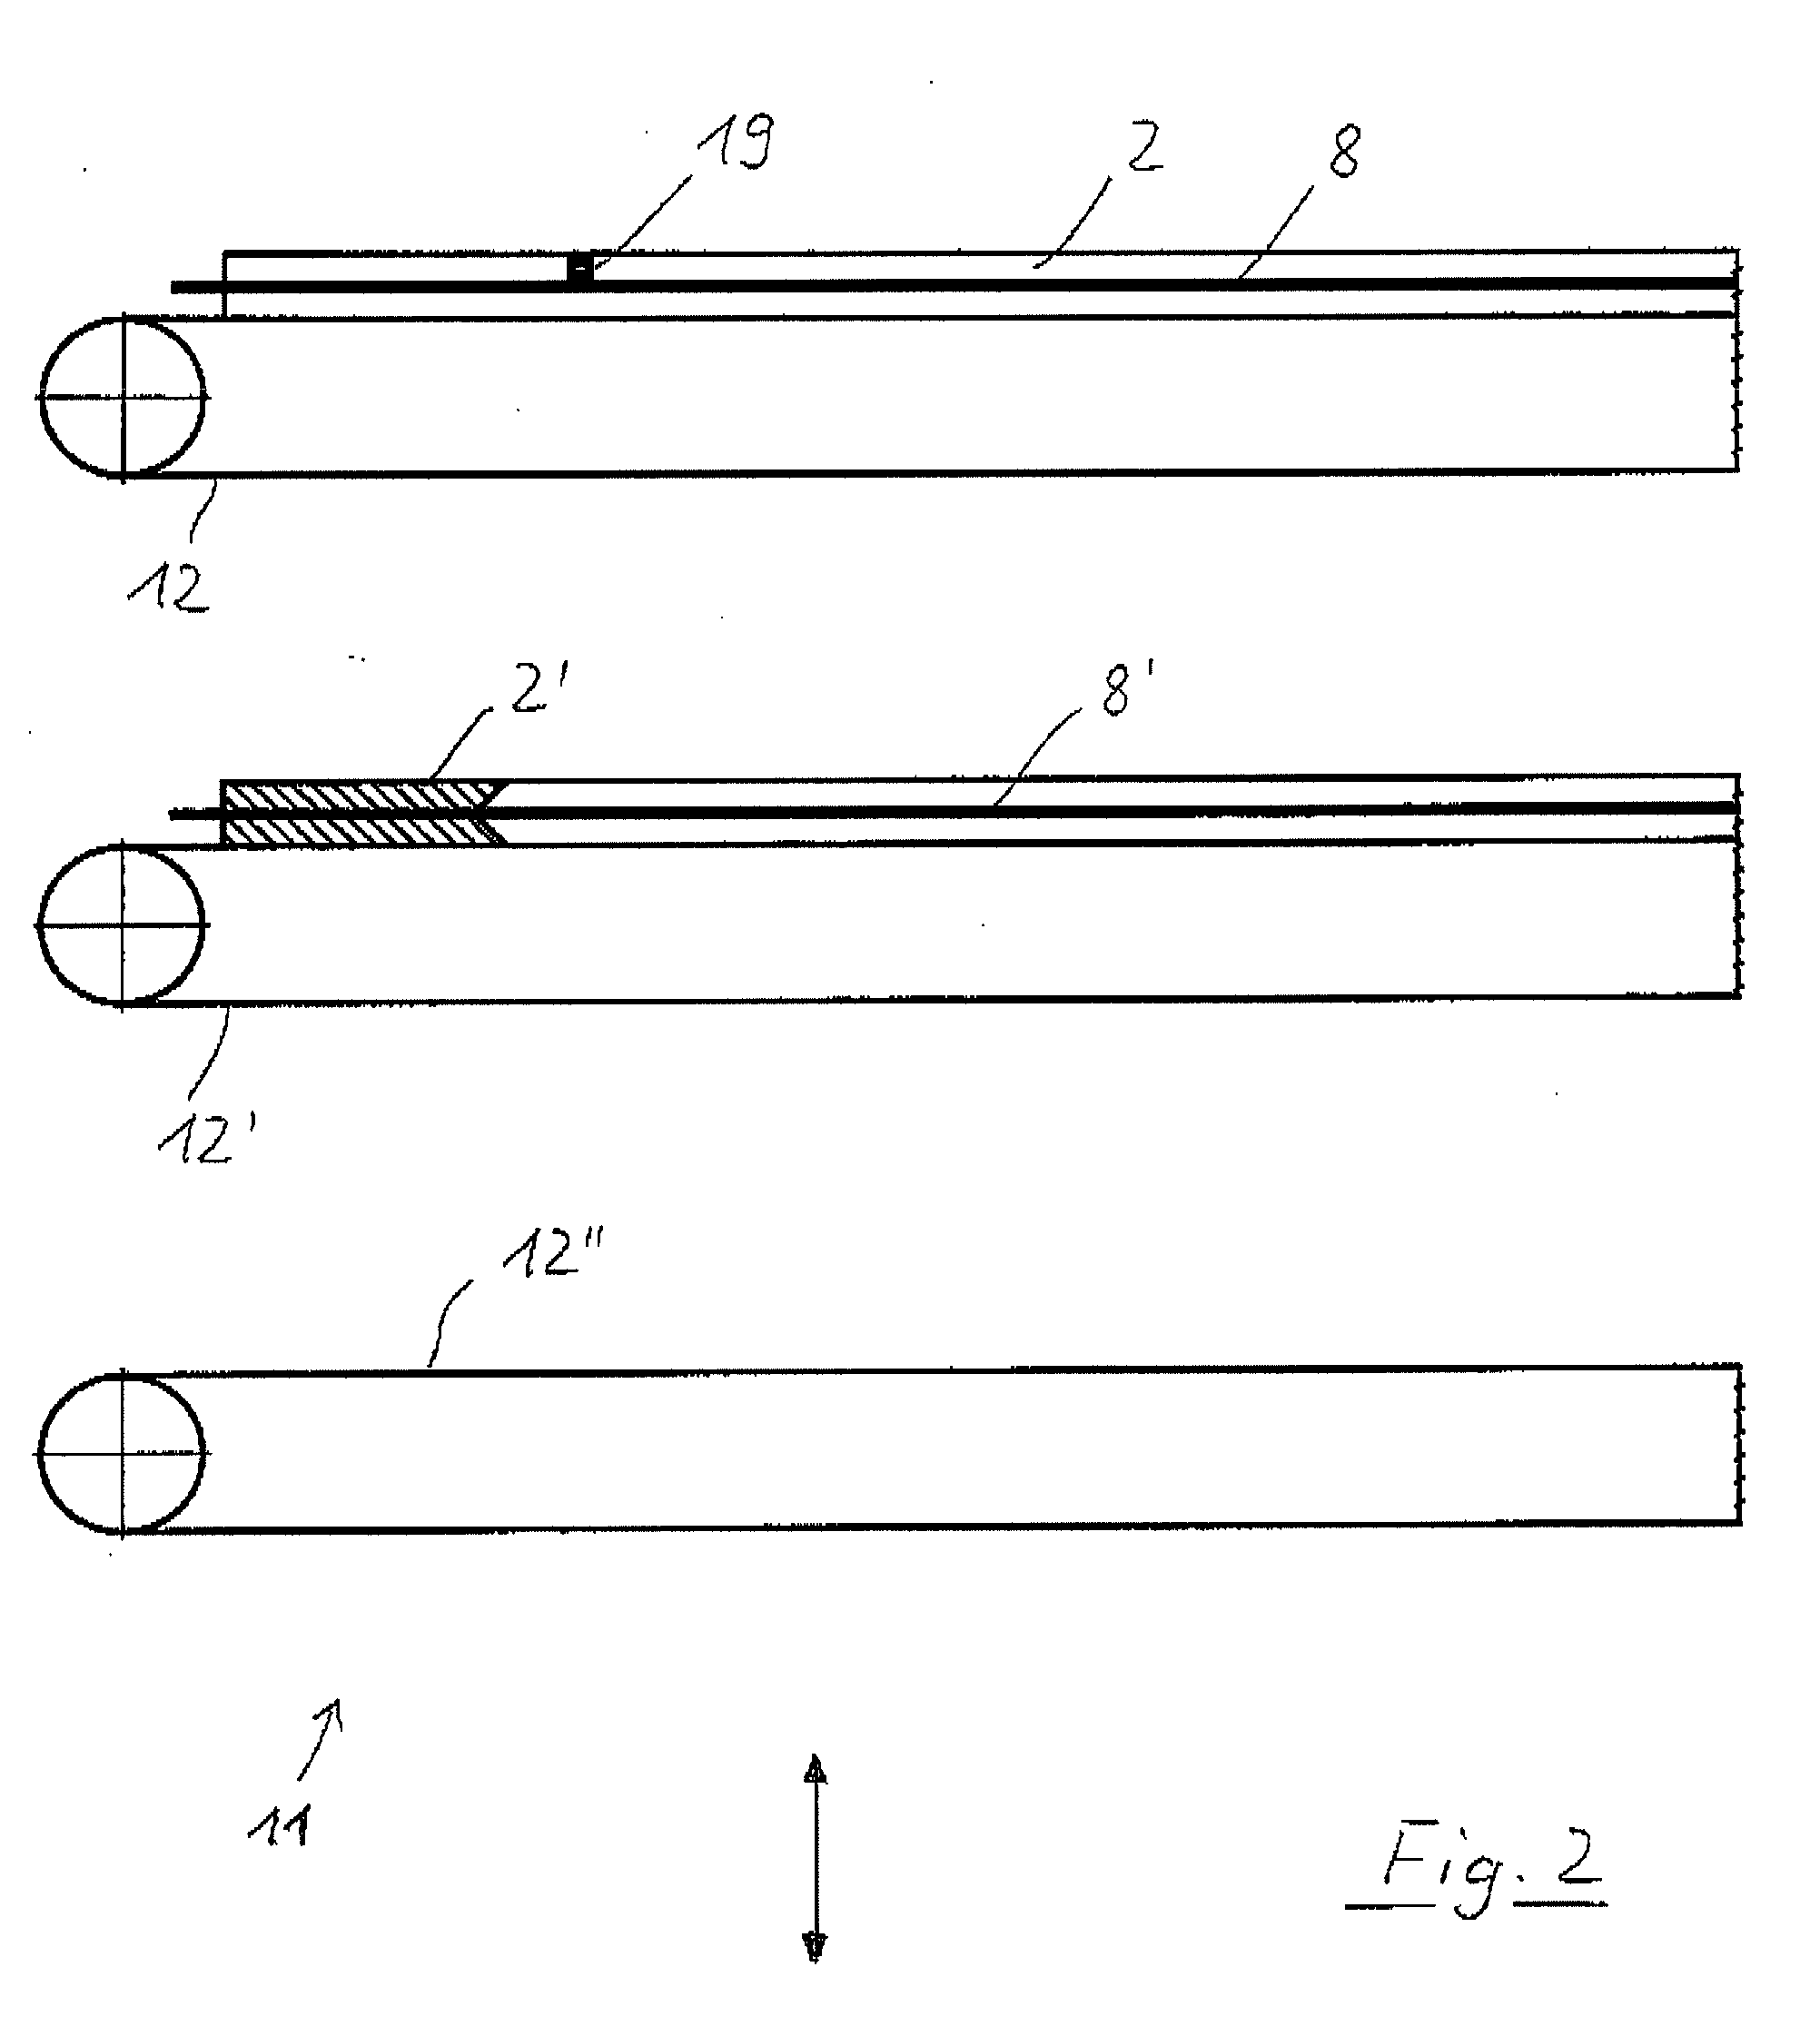 Press and method for laminating essentially plate-shaped workpieces